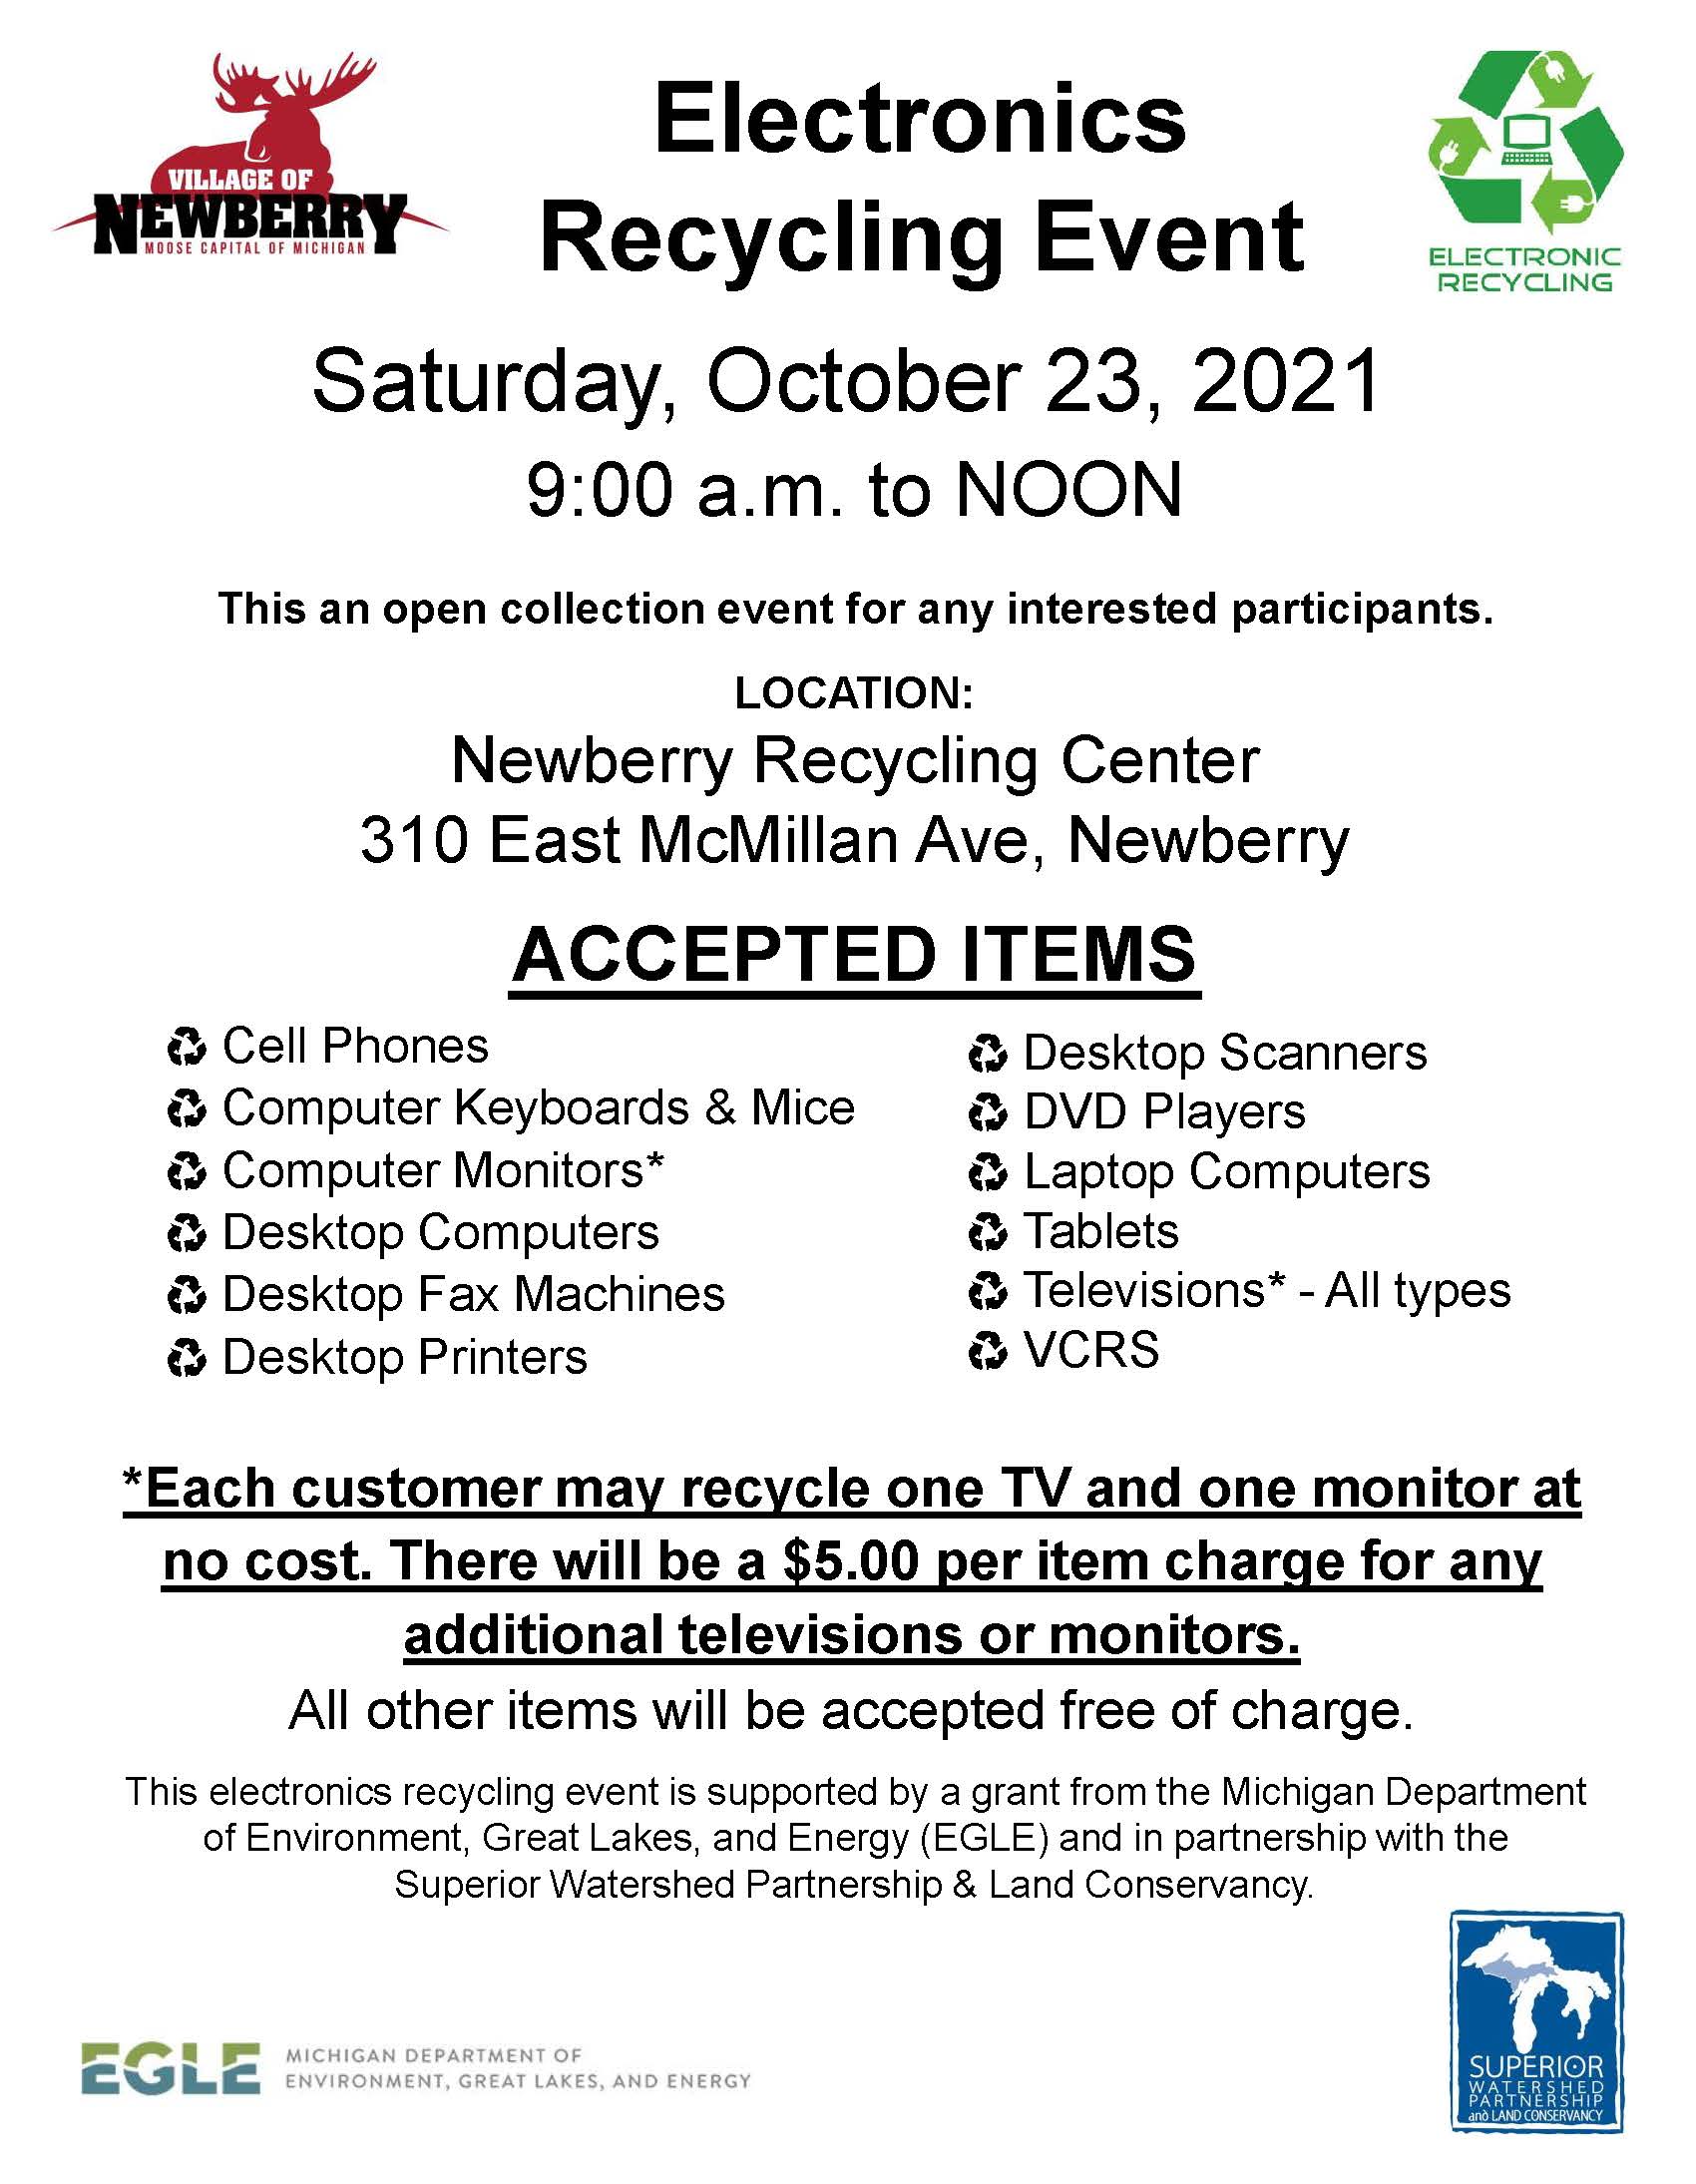 2021_Electronics_Event_Flyer_Newberry_Oct_23_updated